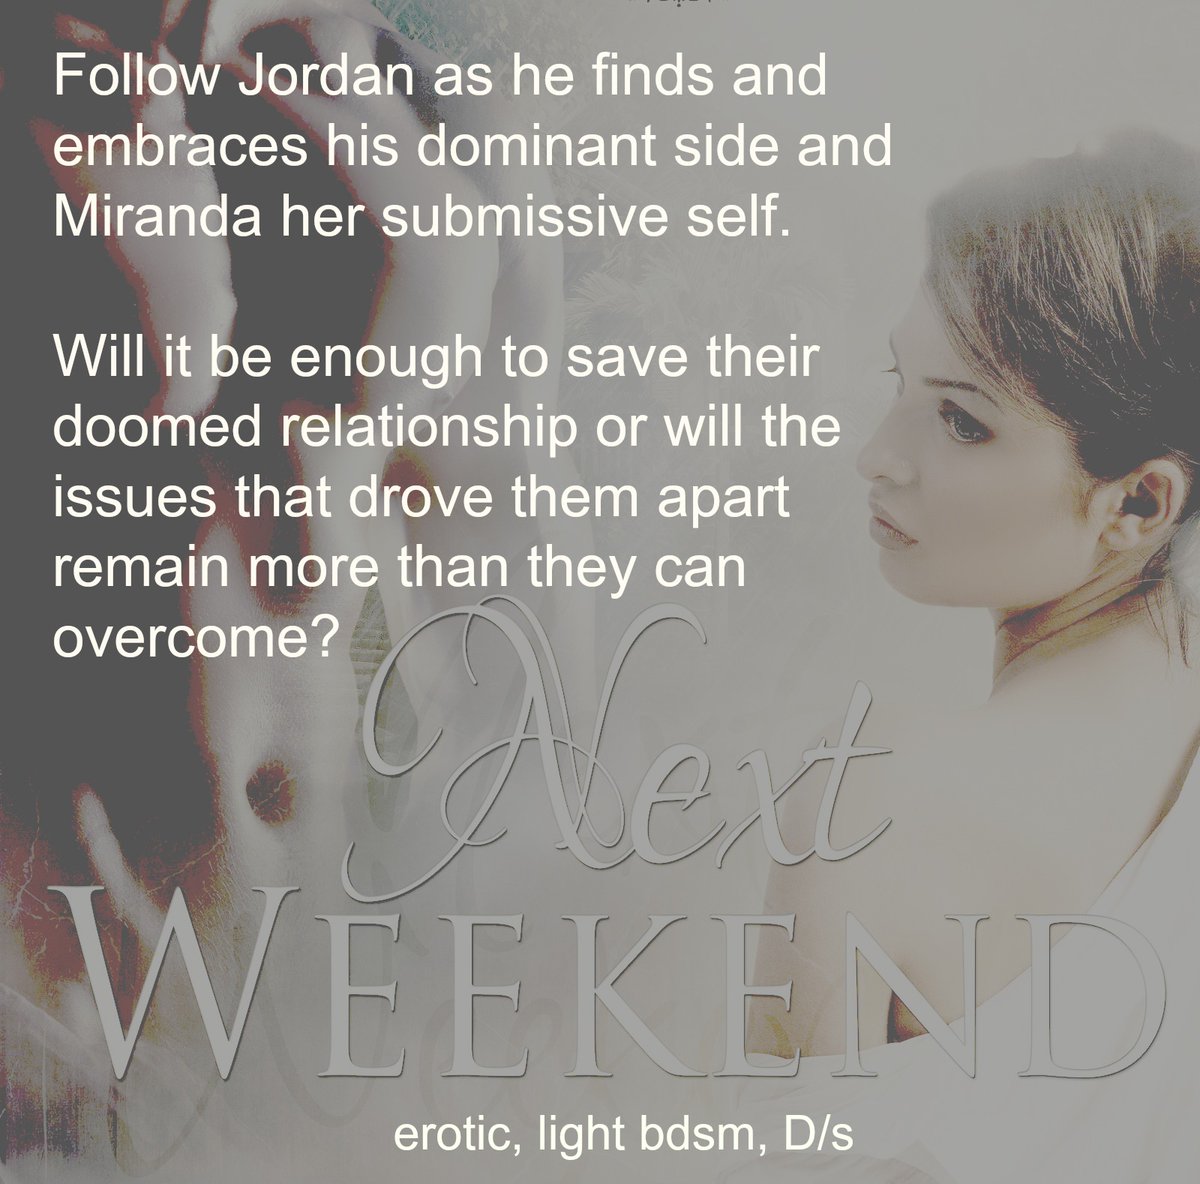 A couple in the midst of divorce proceedings discover something new & totally unexpected. Will this sudden revelation be enough to save their relationship, or will the issues that drove them apart remain more than they can overcome? #erotica #weekendread

books2read.com/u/me0MQE